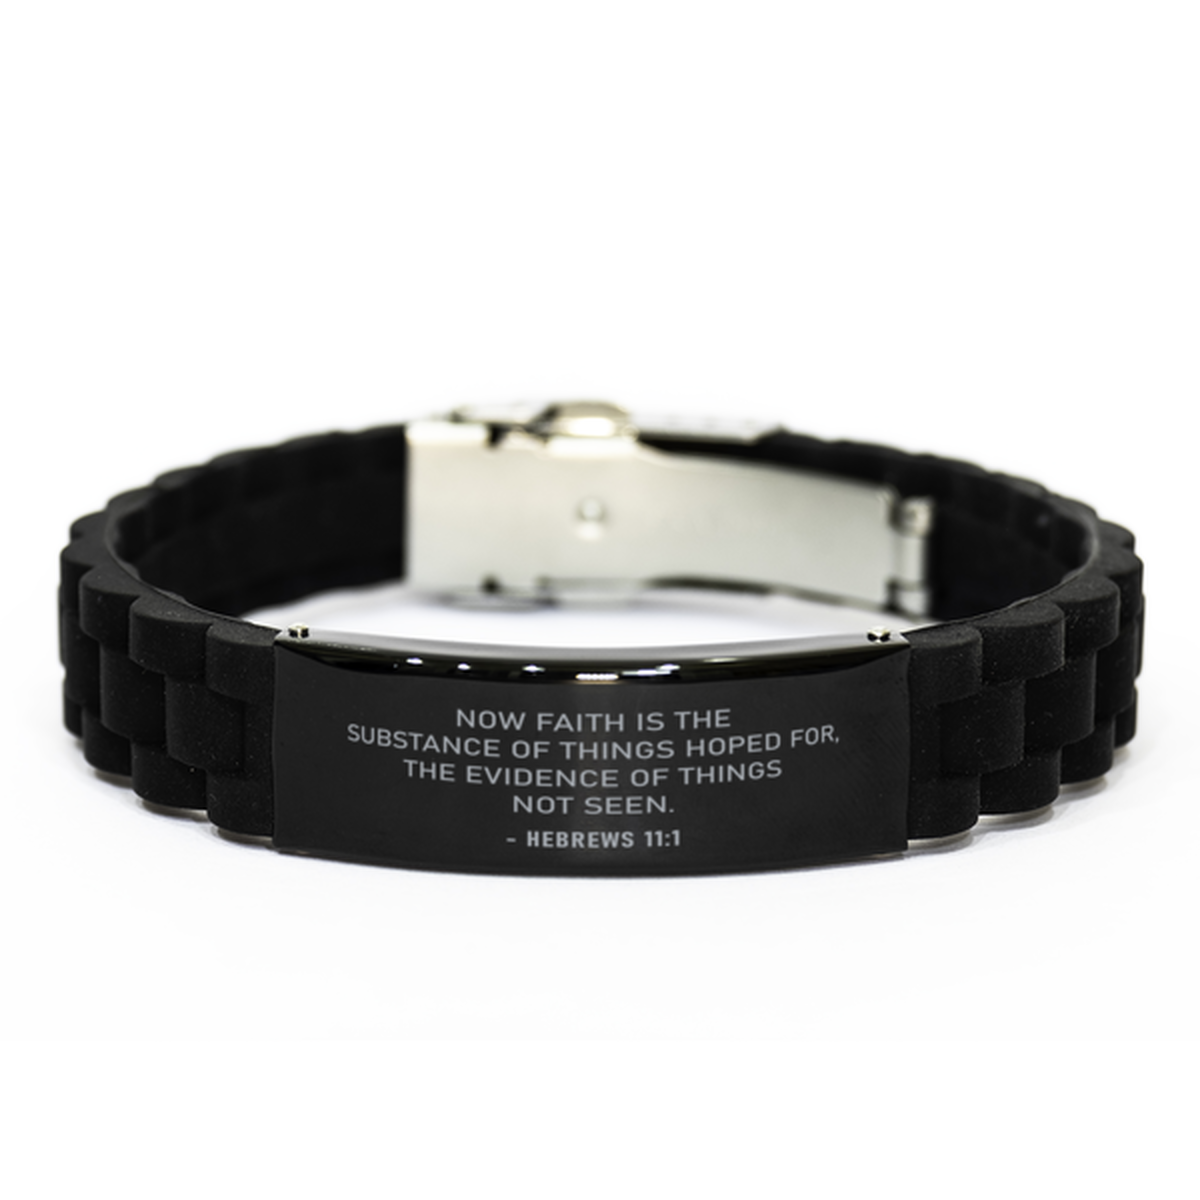 Bible Verse Black Bracelet,, Hebrews 11:1 Now Faith Is The Substance Of Things Hoped For,, Inspirational Christian Gifts For Men Women